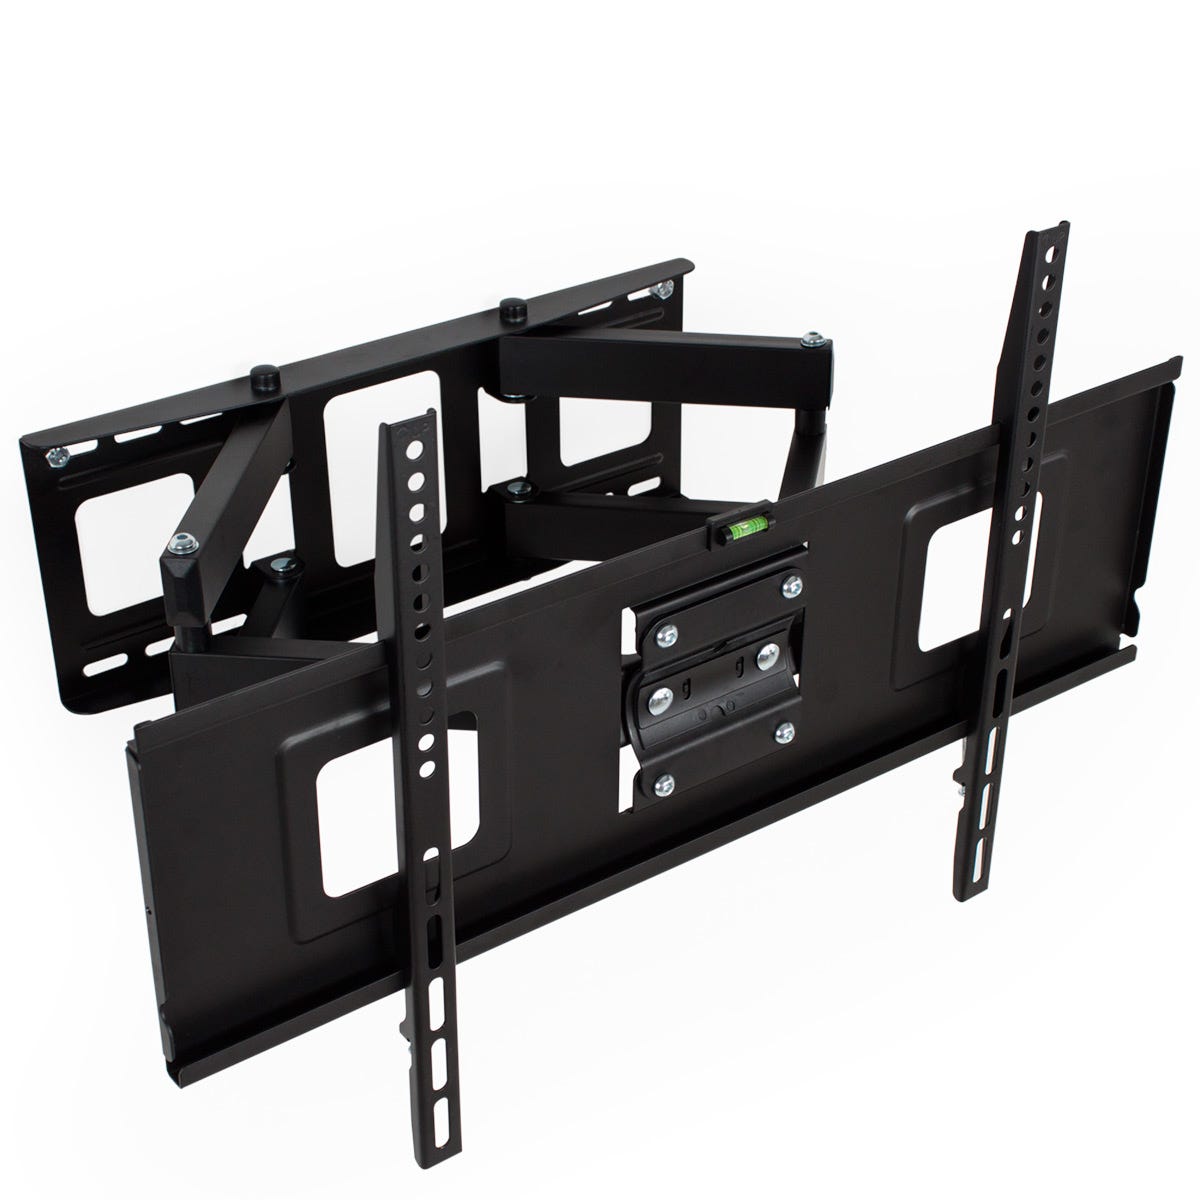 Tectake Support mural TV 32- 55 orientable et inclinable,VESA